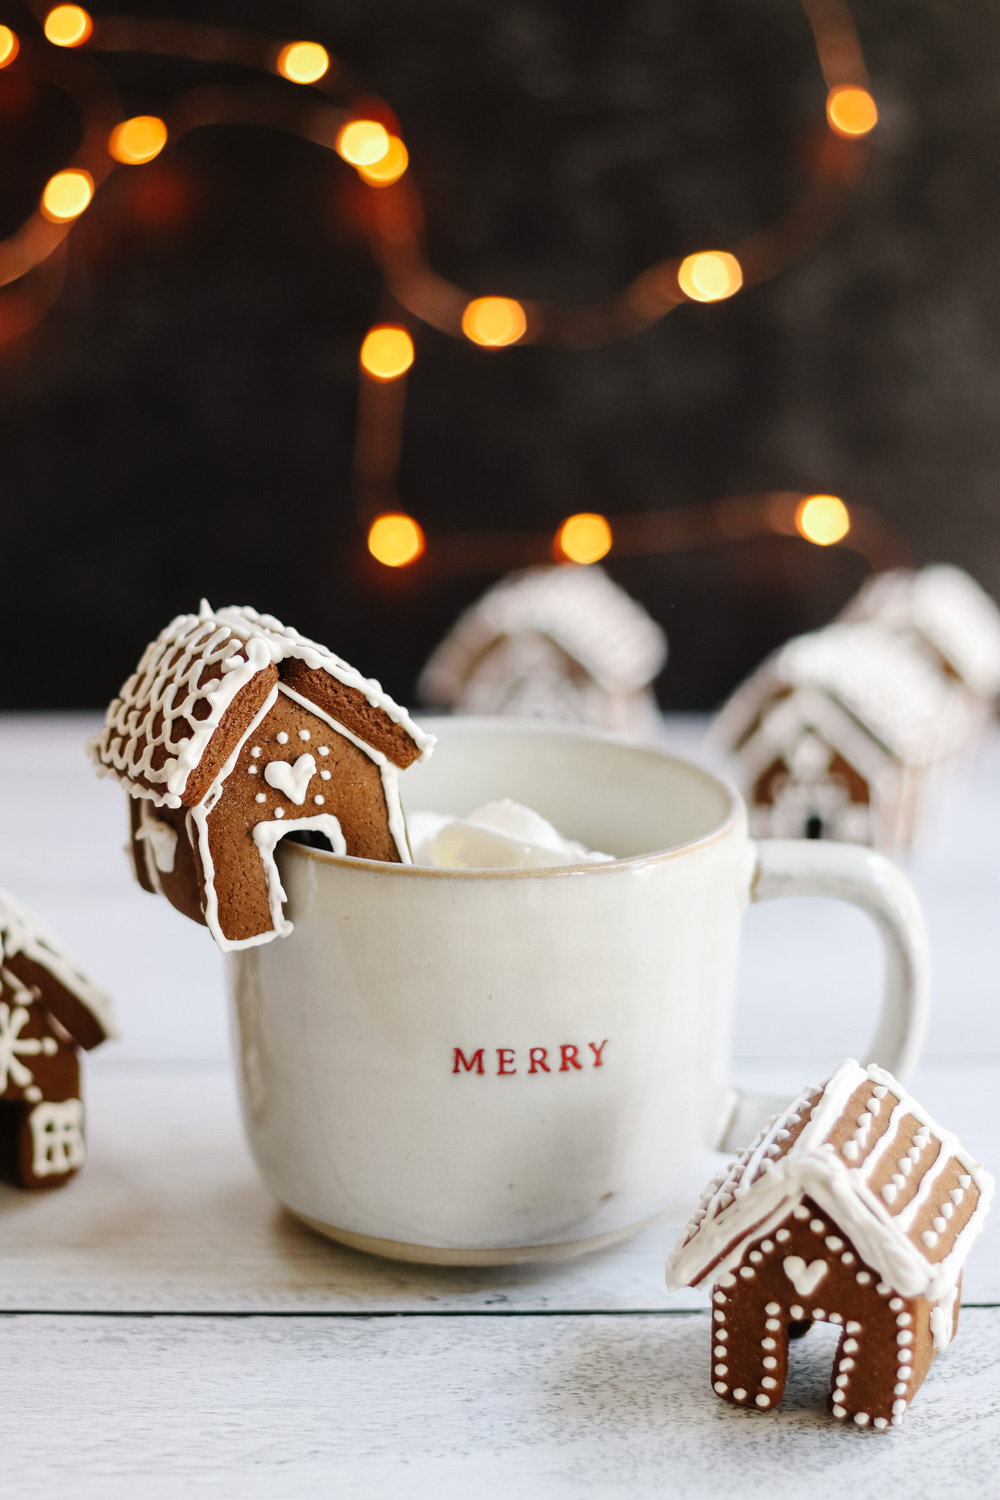 Accessories for Cups: The Mini Gingerbread House For Mugs